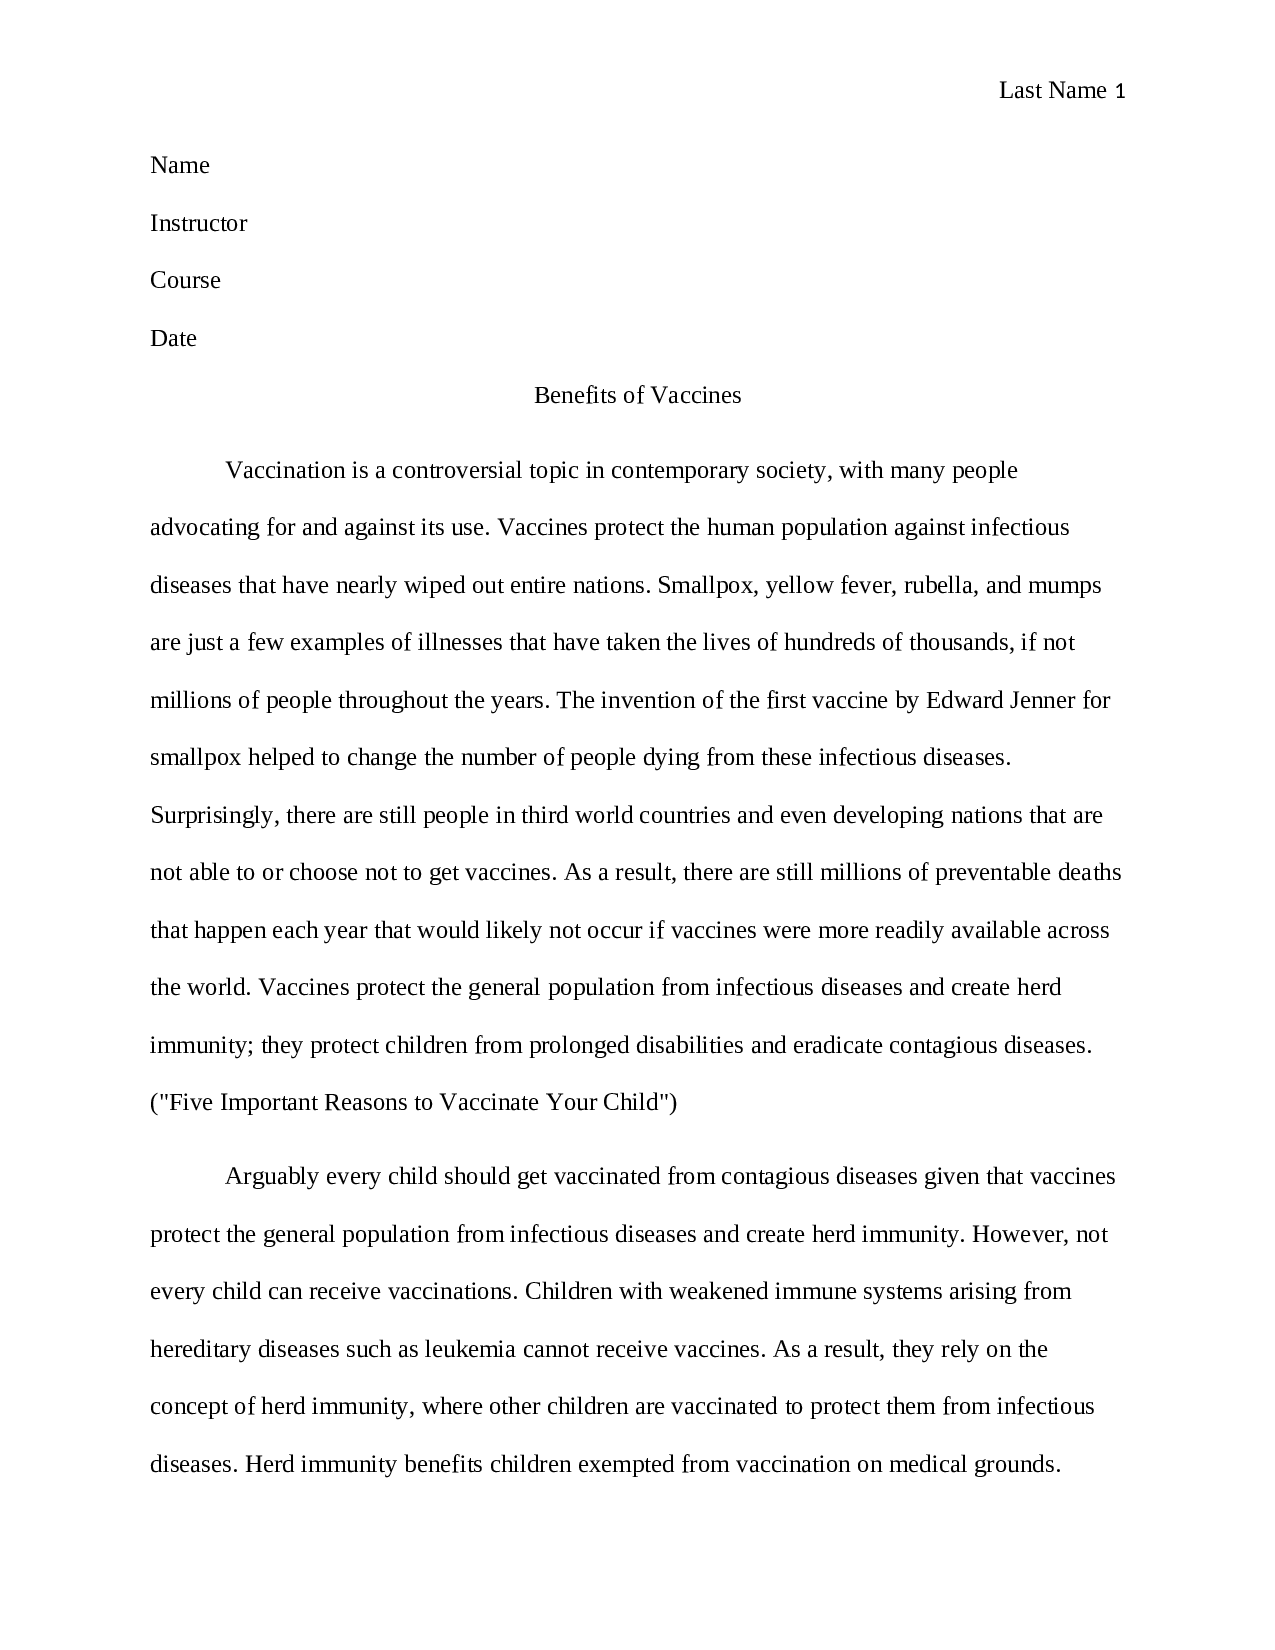 how to write expository essay with examples